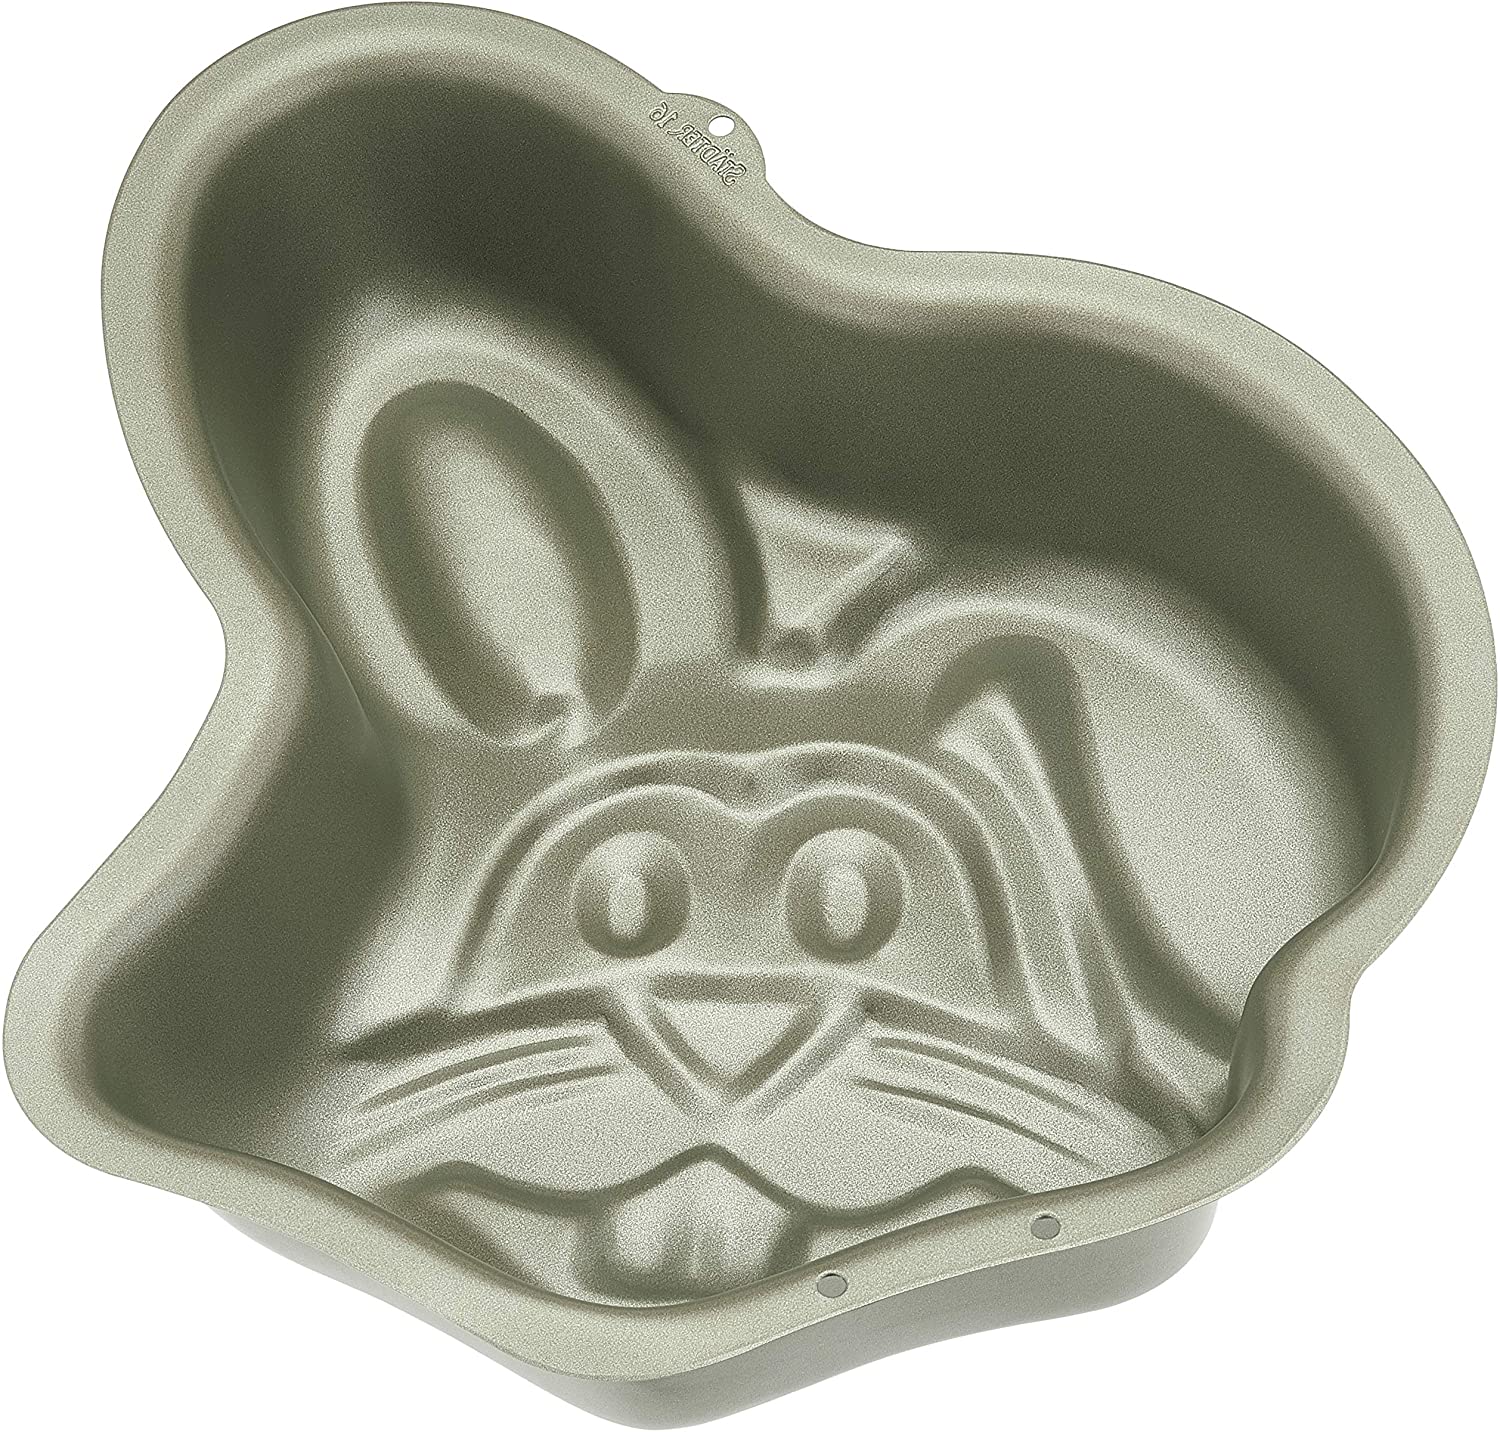 Städter 601079 Baking Mould Bunny Face, Non-Stick Coating, Grey, 26 x 17 x 3 cm